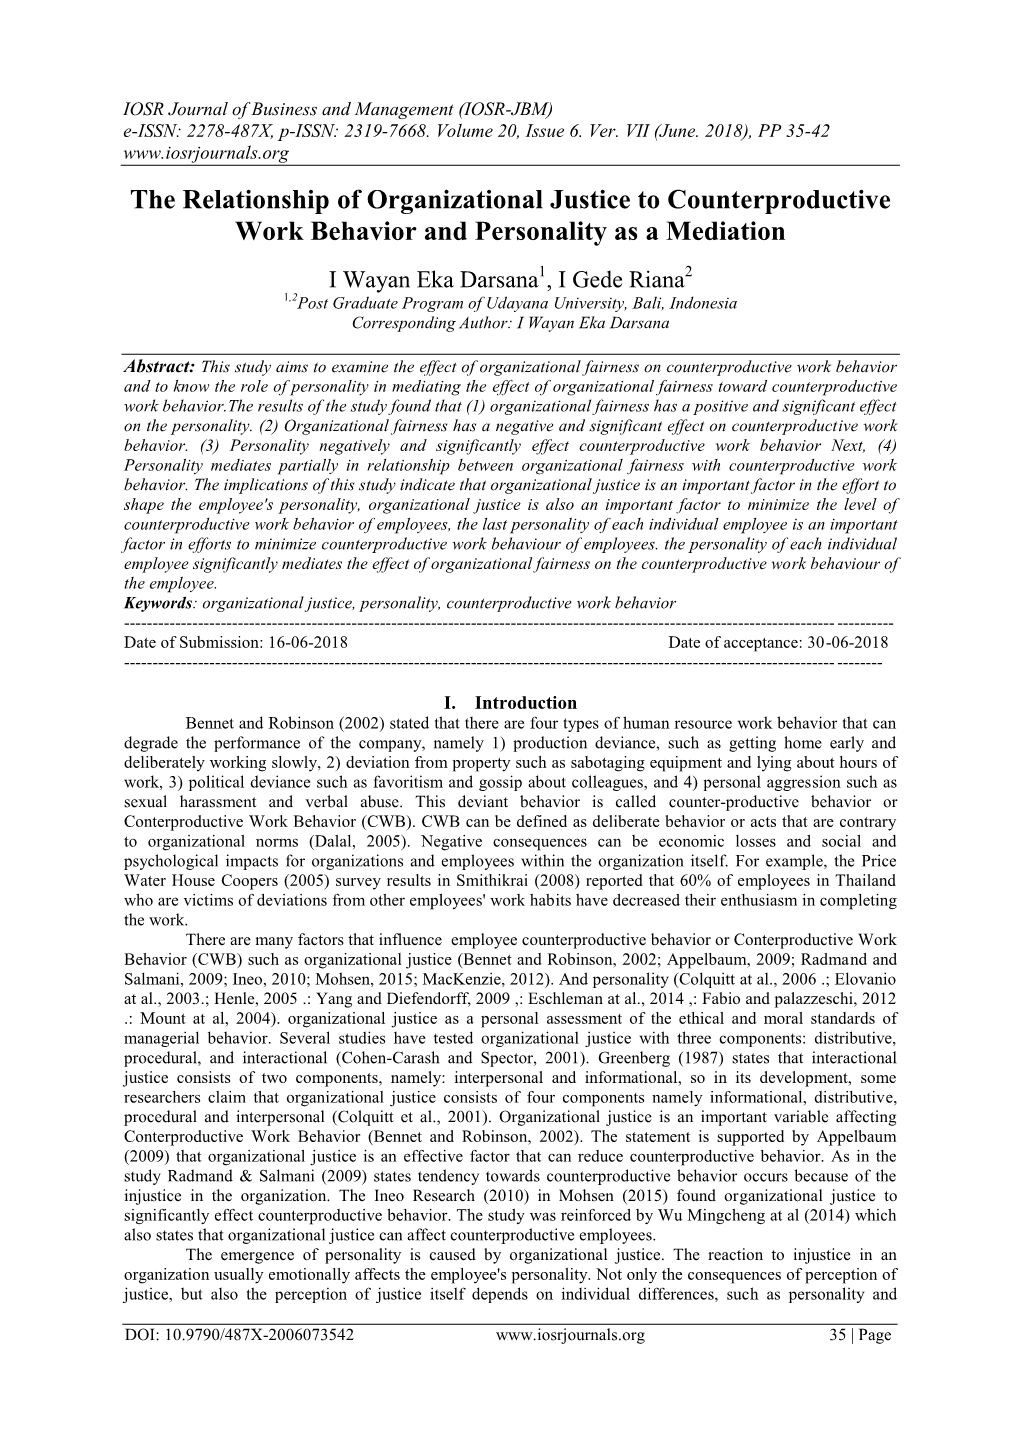 The Relationship of Organizational Justice to Counterproductive Work Behavior and Personality As a Mediation